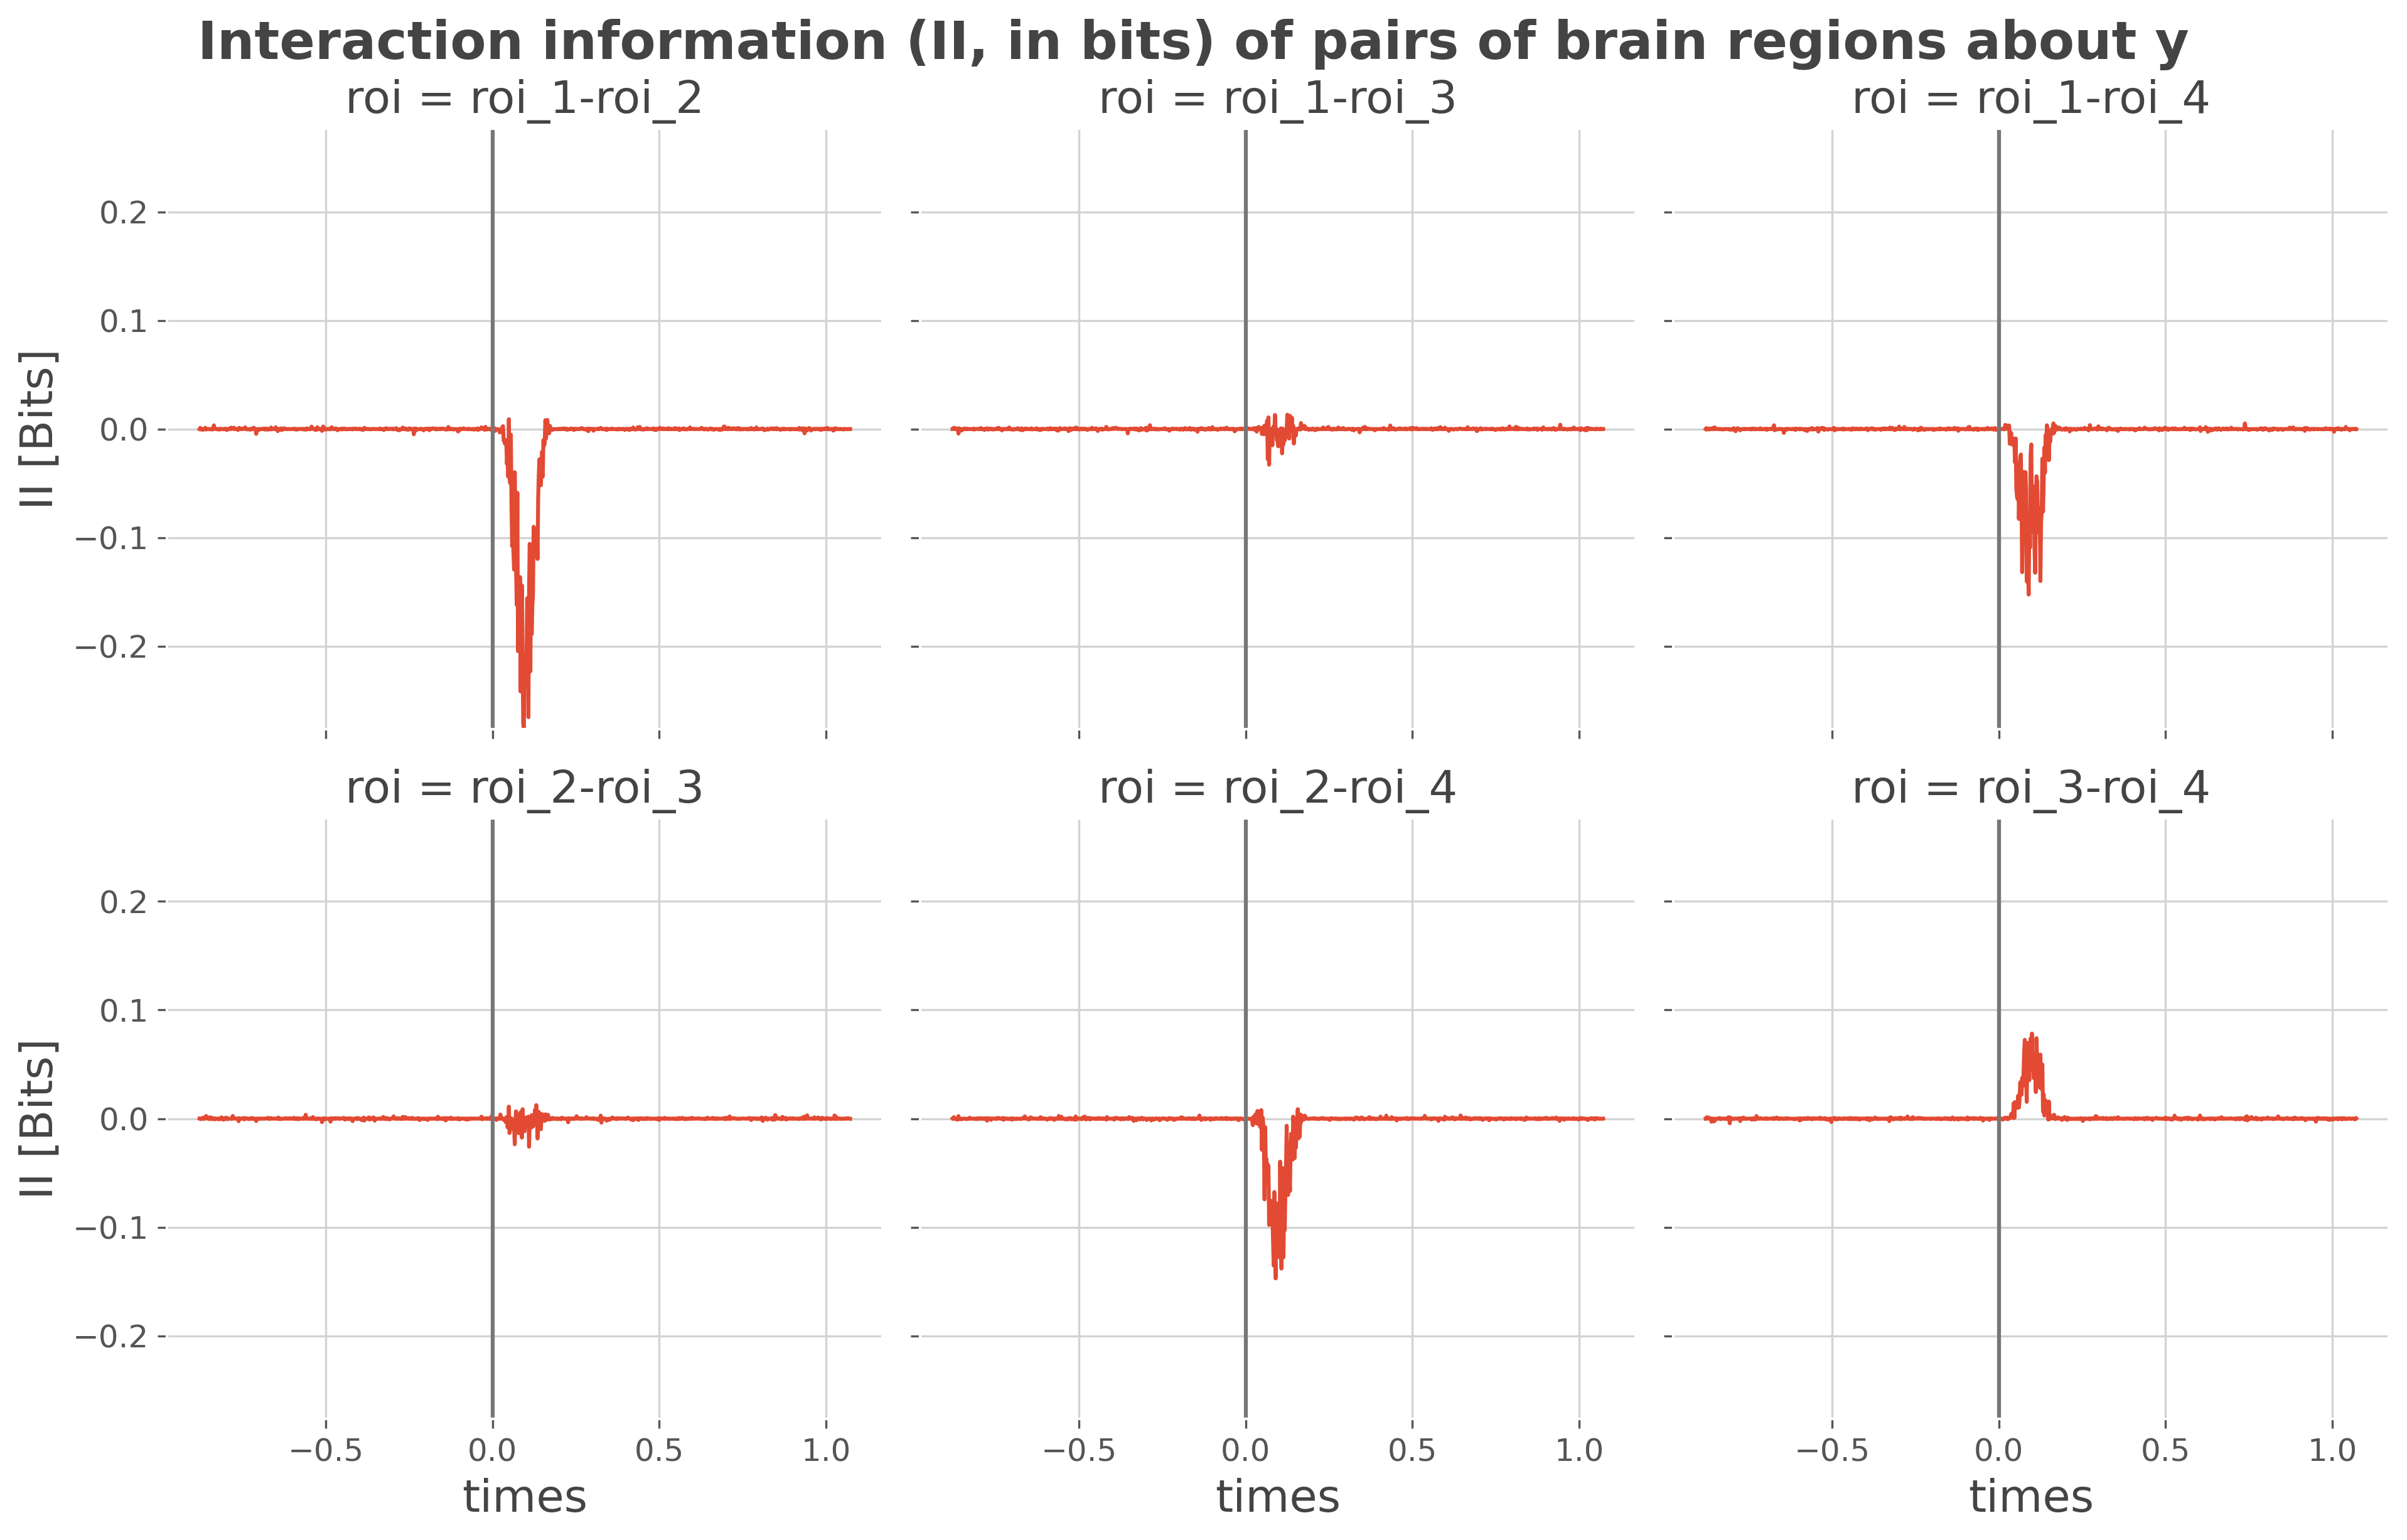 Interaction information (II, in bits) of pairs of brain regions about y, roi = roi_1-roi_2, roi = roi_1-roi_3, roi = roi_1-roi_4, roi = roi_2-roi_3, roi = roi_2-roi_4, roi = roi_3-roi_4